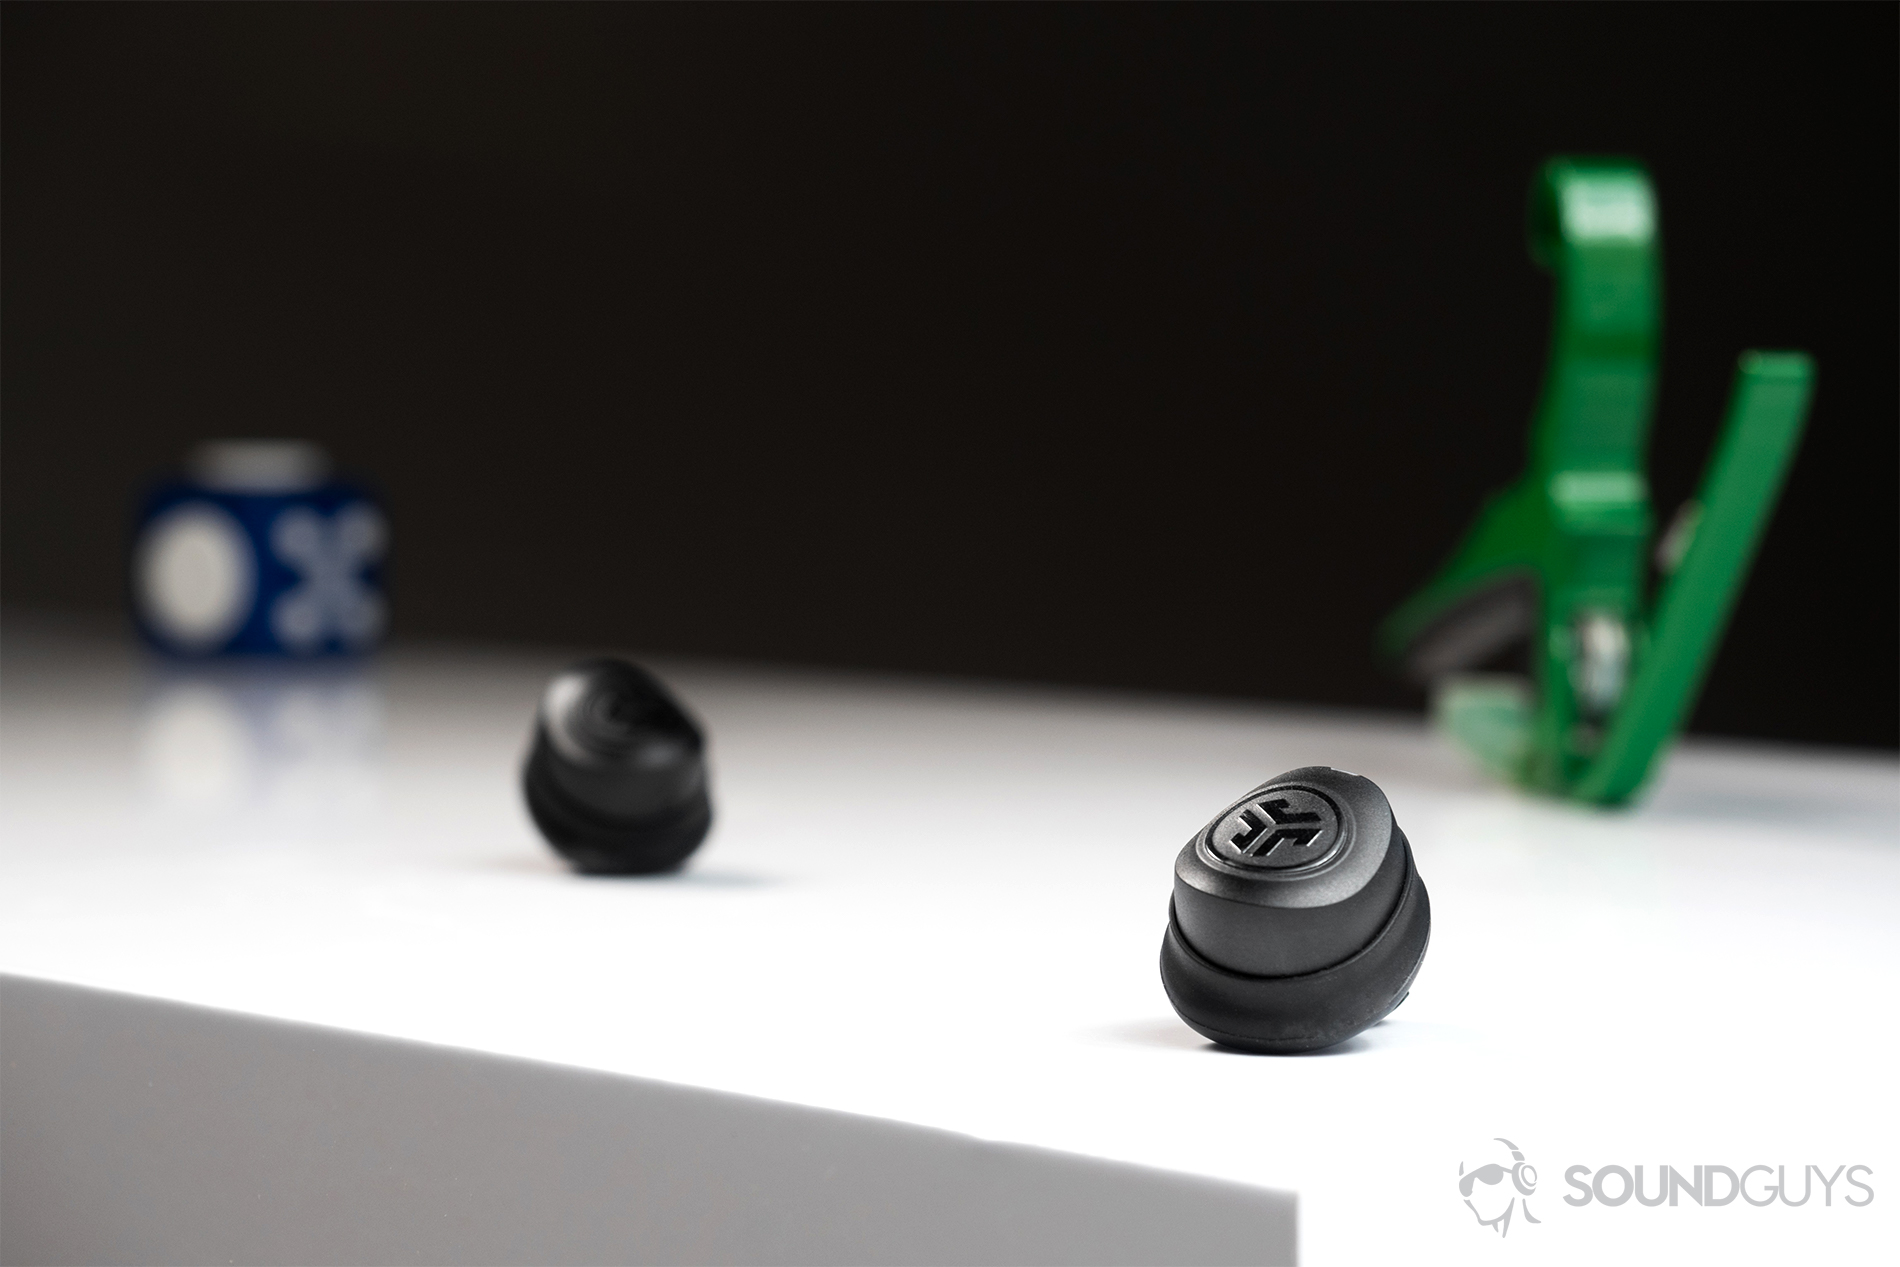 A picture of the JLab JBuds Air true wireless workout earbuds (black) on a white table with a guitar capo in the background.